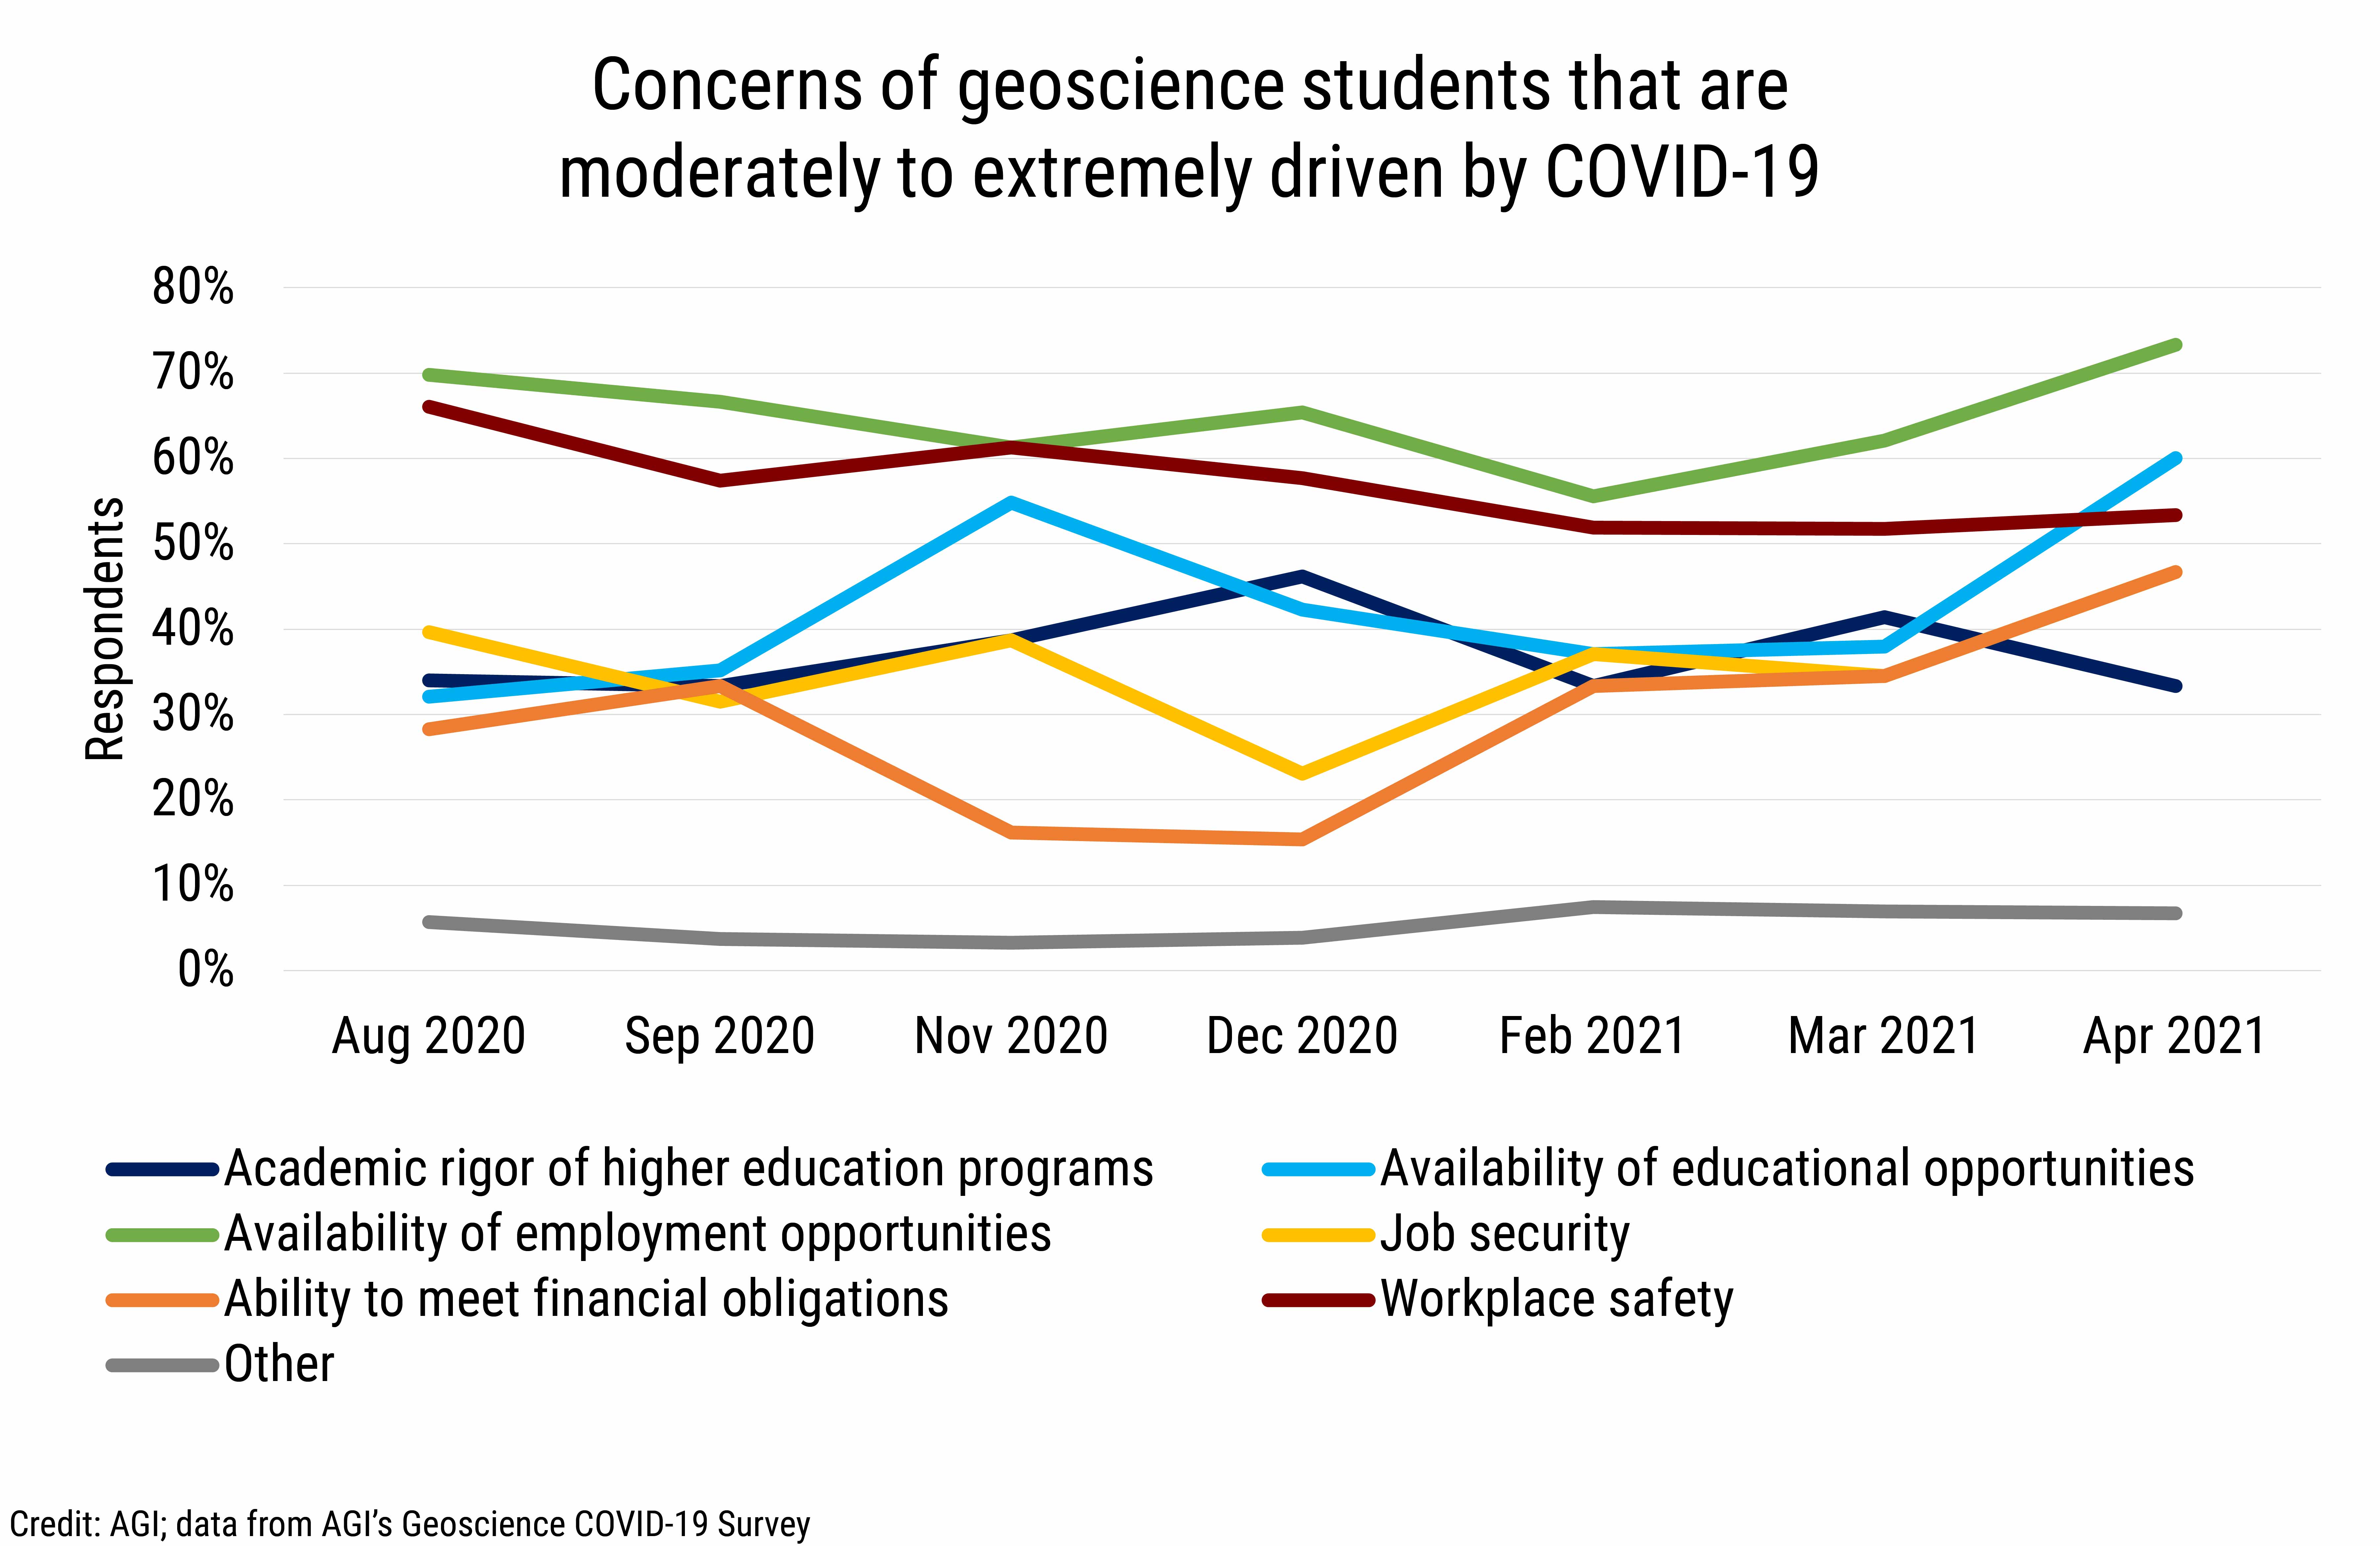 DB_2021-015 chart 06: Concerns of geoscience students that are moderately to extremely driven by COVID-19 (Credit: AGI; data from AGI's Geoscience COVID-19 Survey)